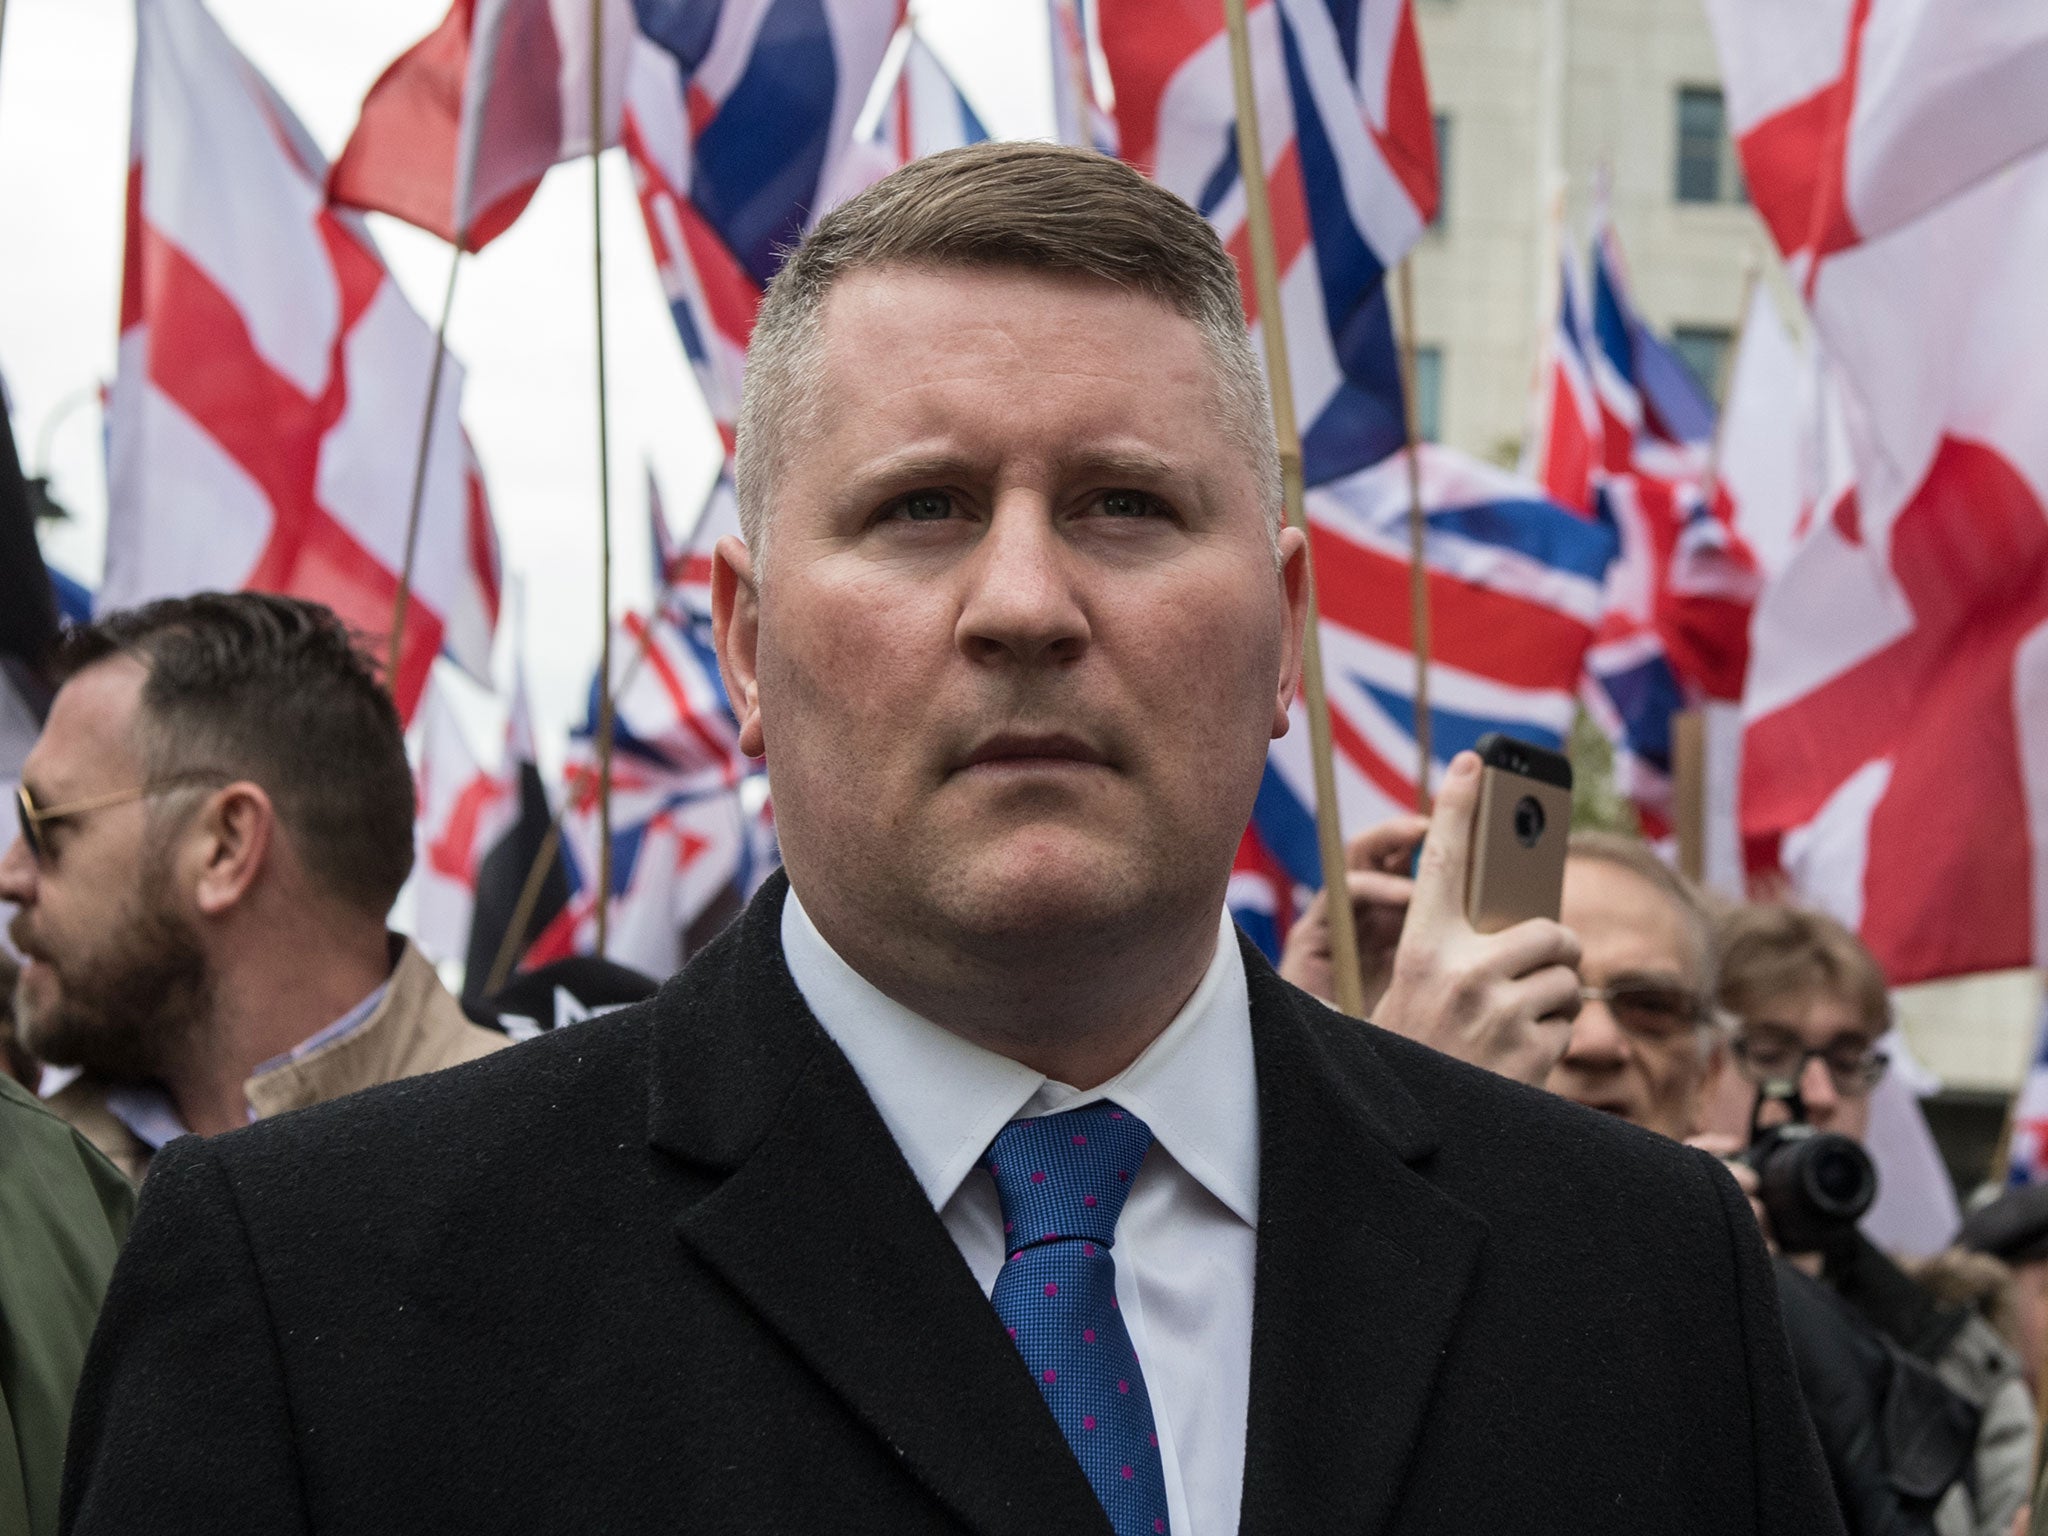 Britain First leader Paul Golding was convicted of a terror offence in May